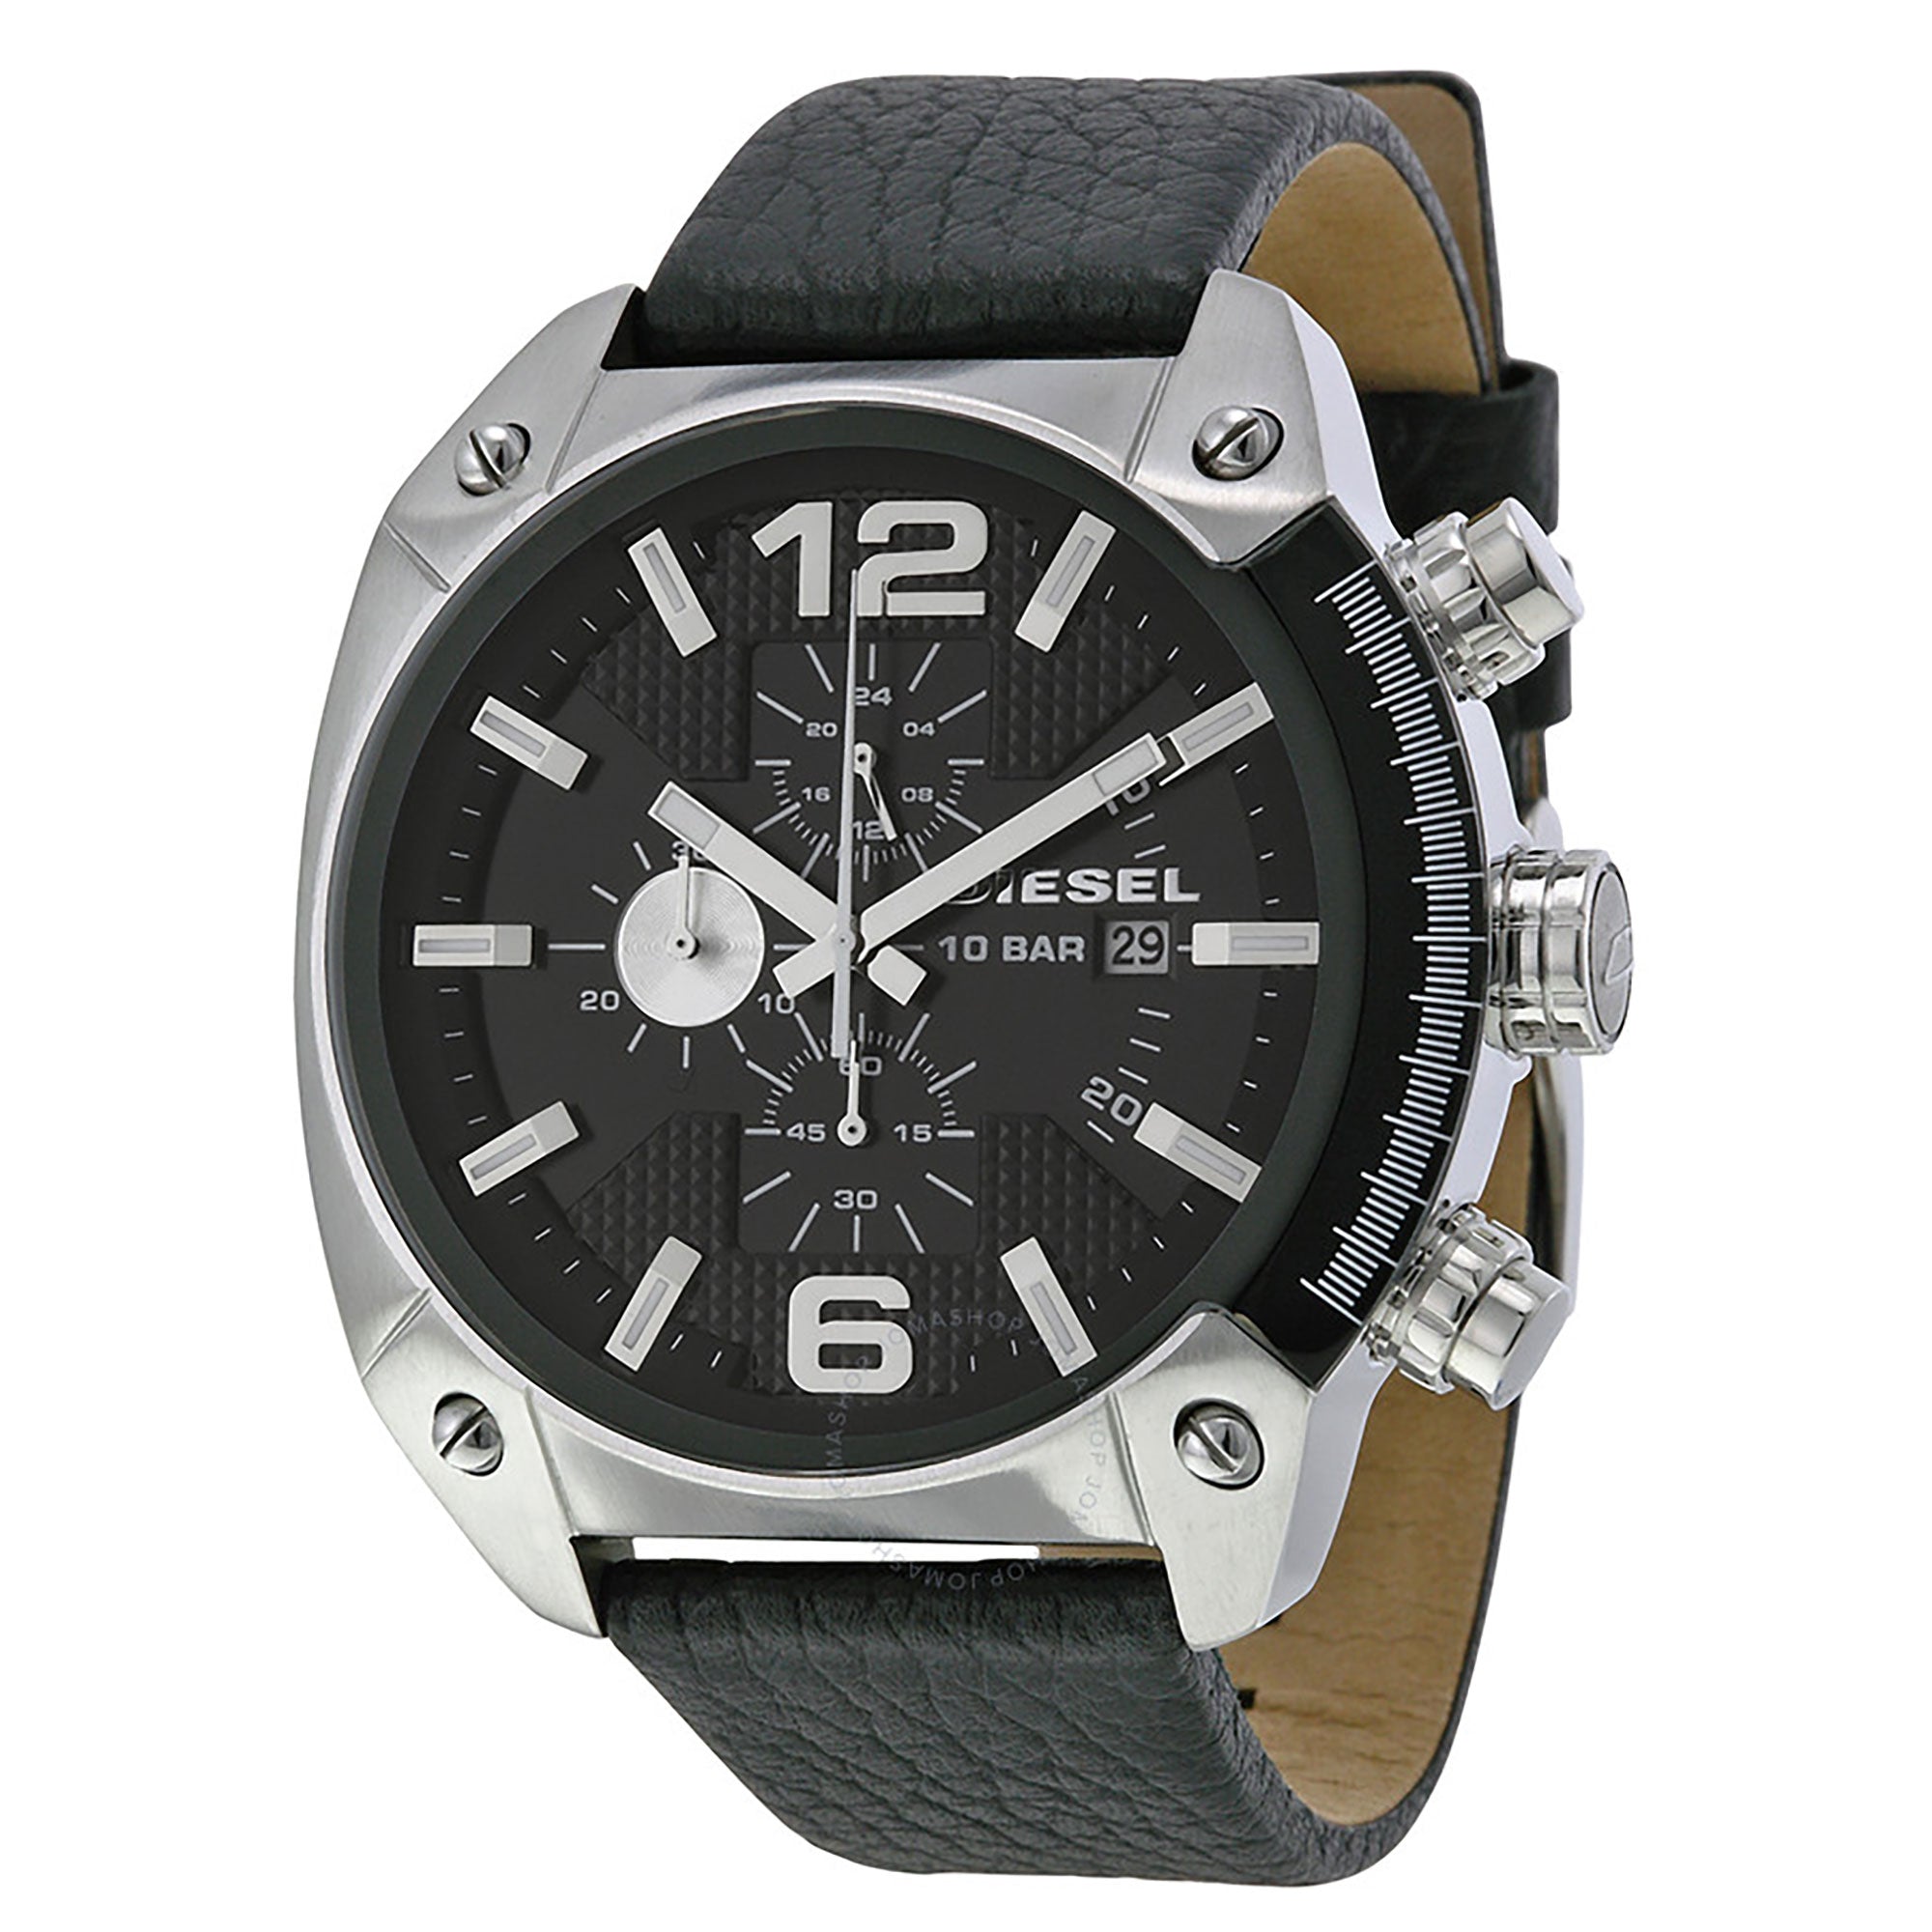 Diesel Men's 46mm Rasp Quartz Stainless Steel and Silicone Three-Hand  Watch, Color: Black (Model: DZ1807) : Clothing, Shoes & Jewelry - Amazon.com